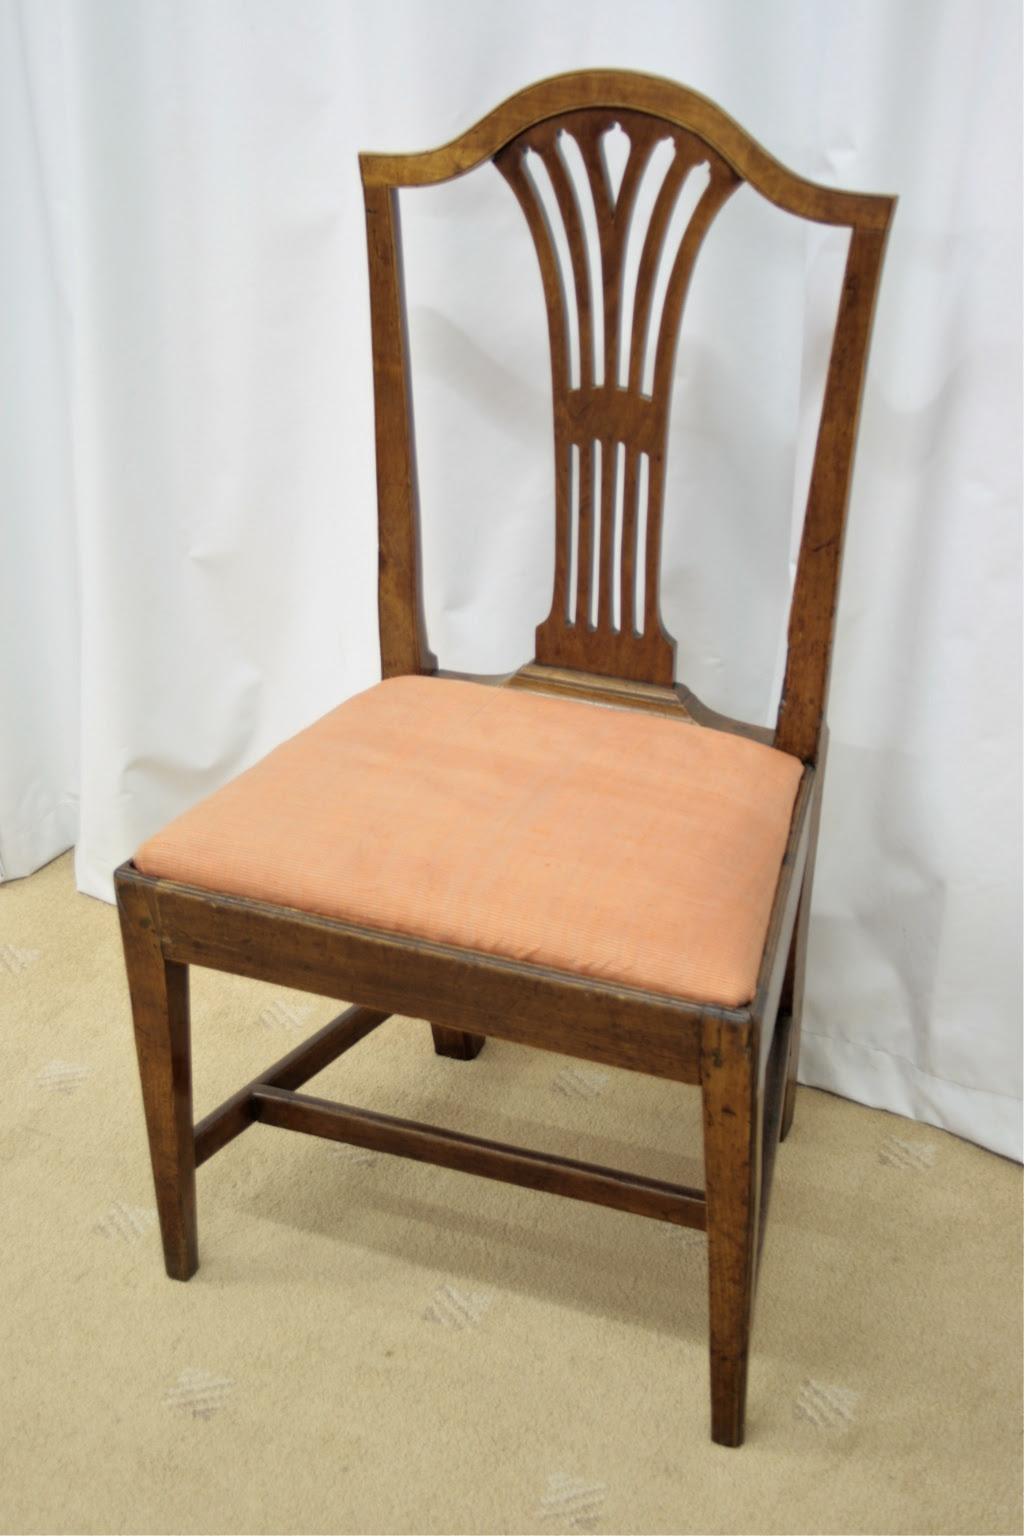 Cheap Dining Room Chairs For Sale : Picking up the best kitchen chairs